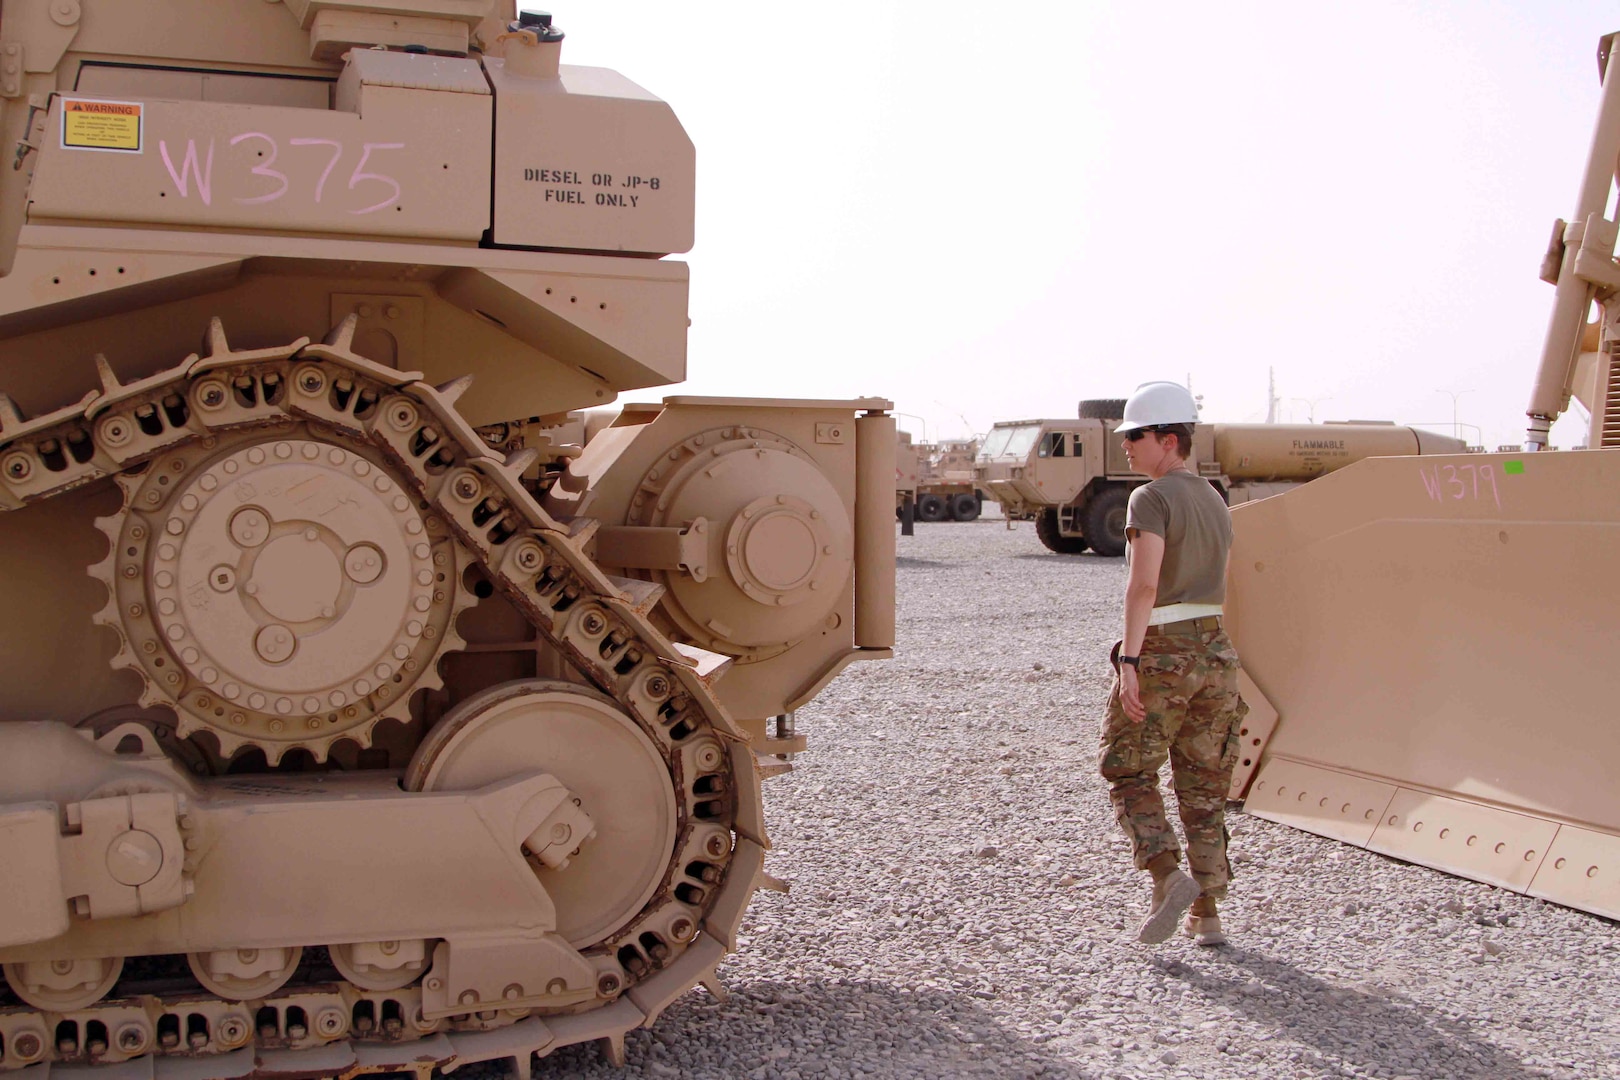 Army Staff Sgt. Jenna Vaughn, 1st Theater Sustainment Command’s Iraq Train and Equip Funding noncommissioned officer, inspects bulldozers received for ITEF July 12, 2016 in Southwest Asia. Armored bulldozers such as these were provided through DLA Troop Support’s Heavy Equipment Procurement Program and will allow Iraqi combat engineers to more effectively clear convoy routes of roadside bombs and other threats in the ongoing fight against the Islamic State of Iraq and the Levant.